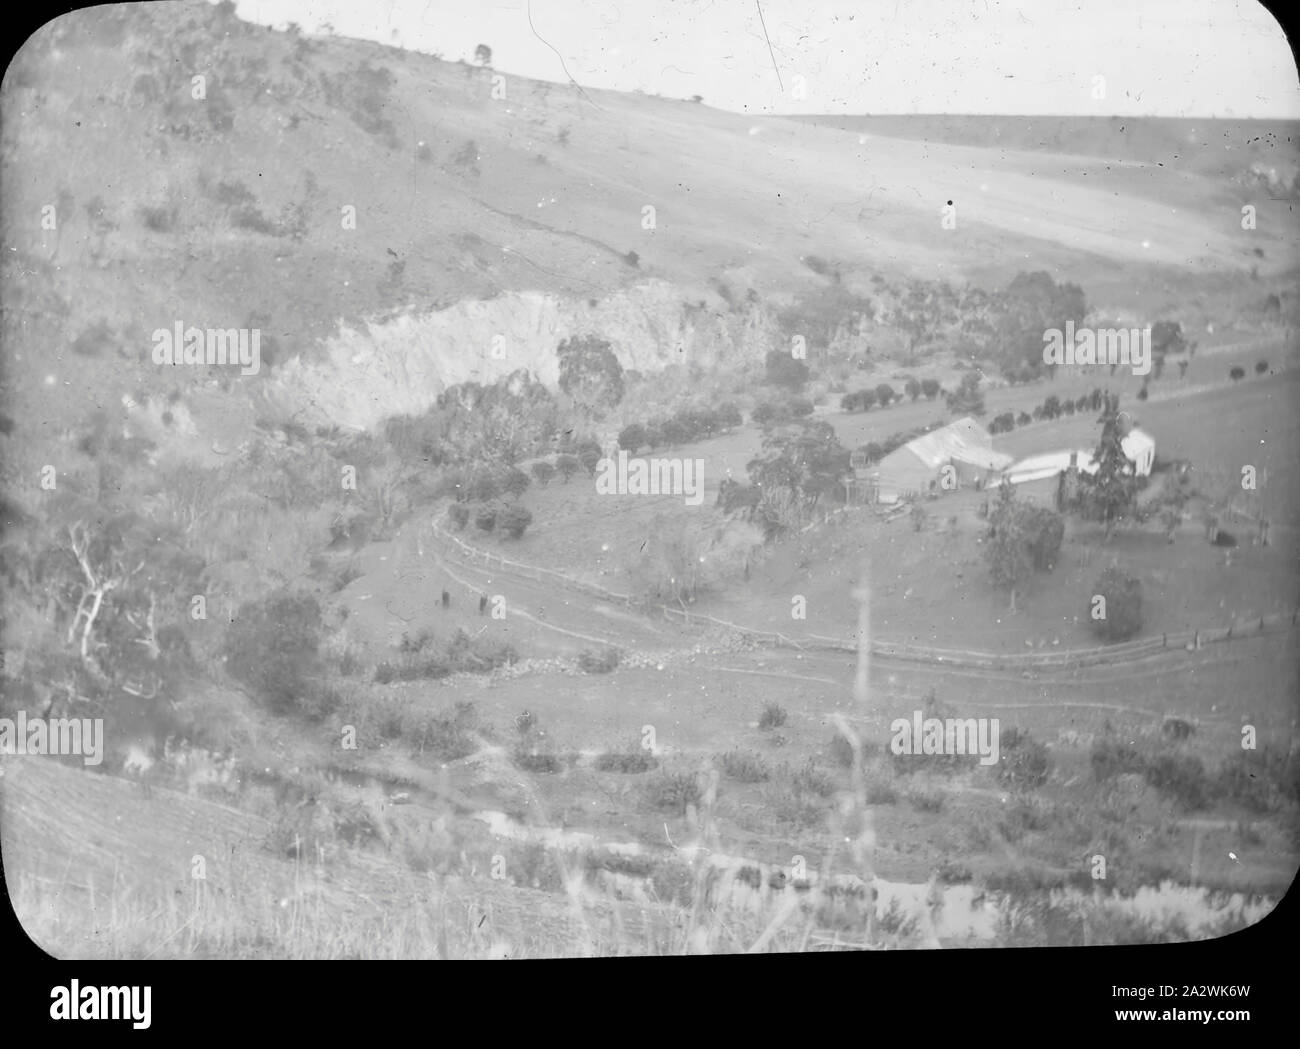 Lantern Slide - Werribee River, Victoria, Date Unknown, Black and white image of a farm established on the bend of the valley created by Werribee River, photographed by A.J. Campbell Stock Photo